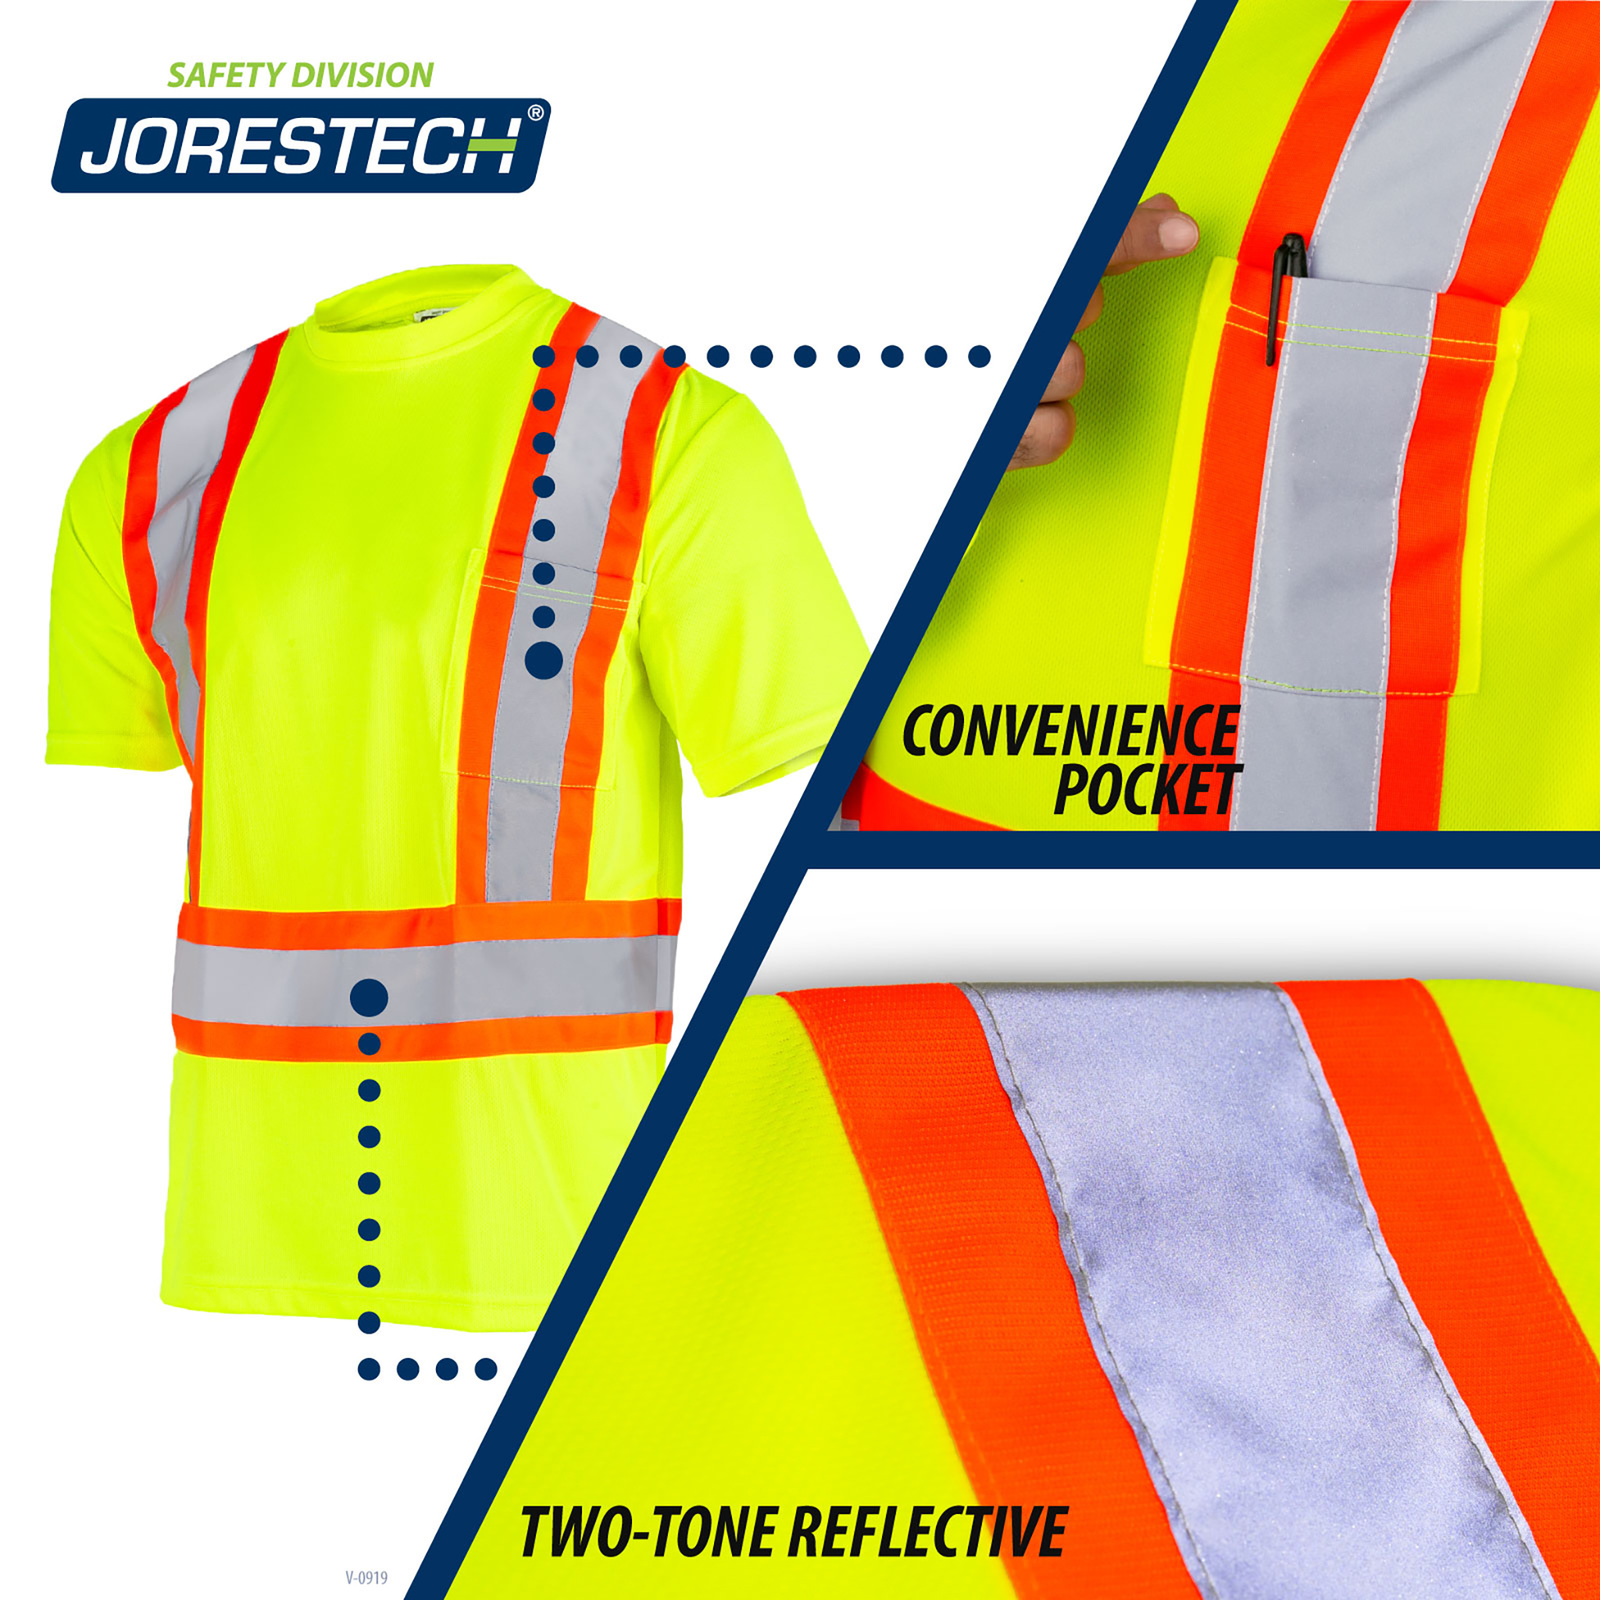 Safety shirt is shown plus 2 call outs that read: Convenience chest pocket, two tone reflective